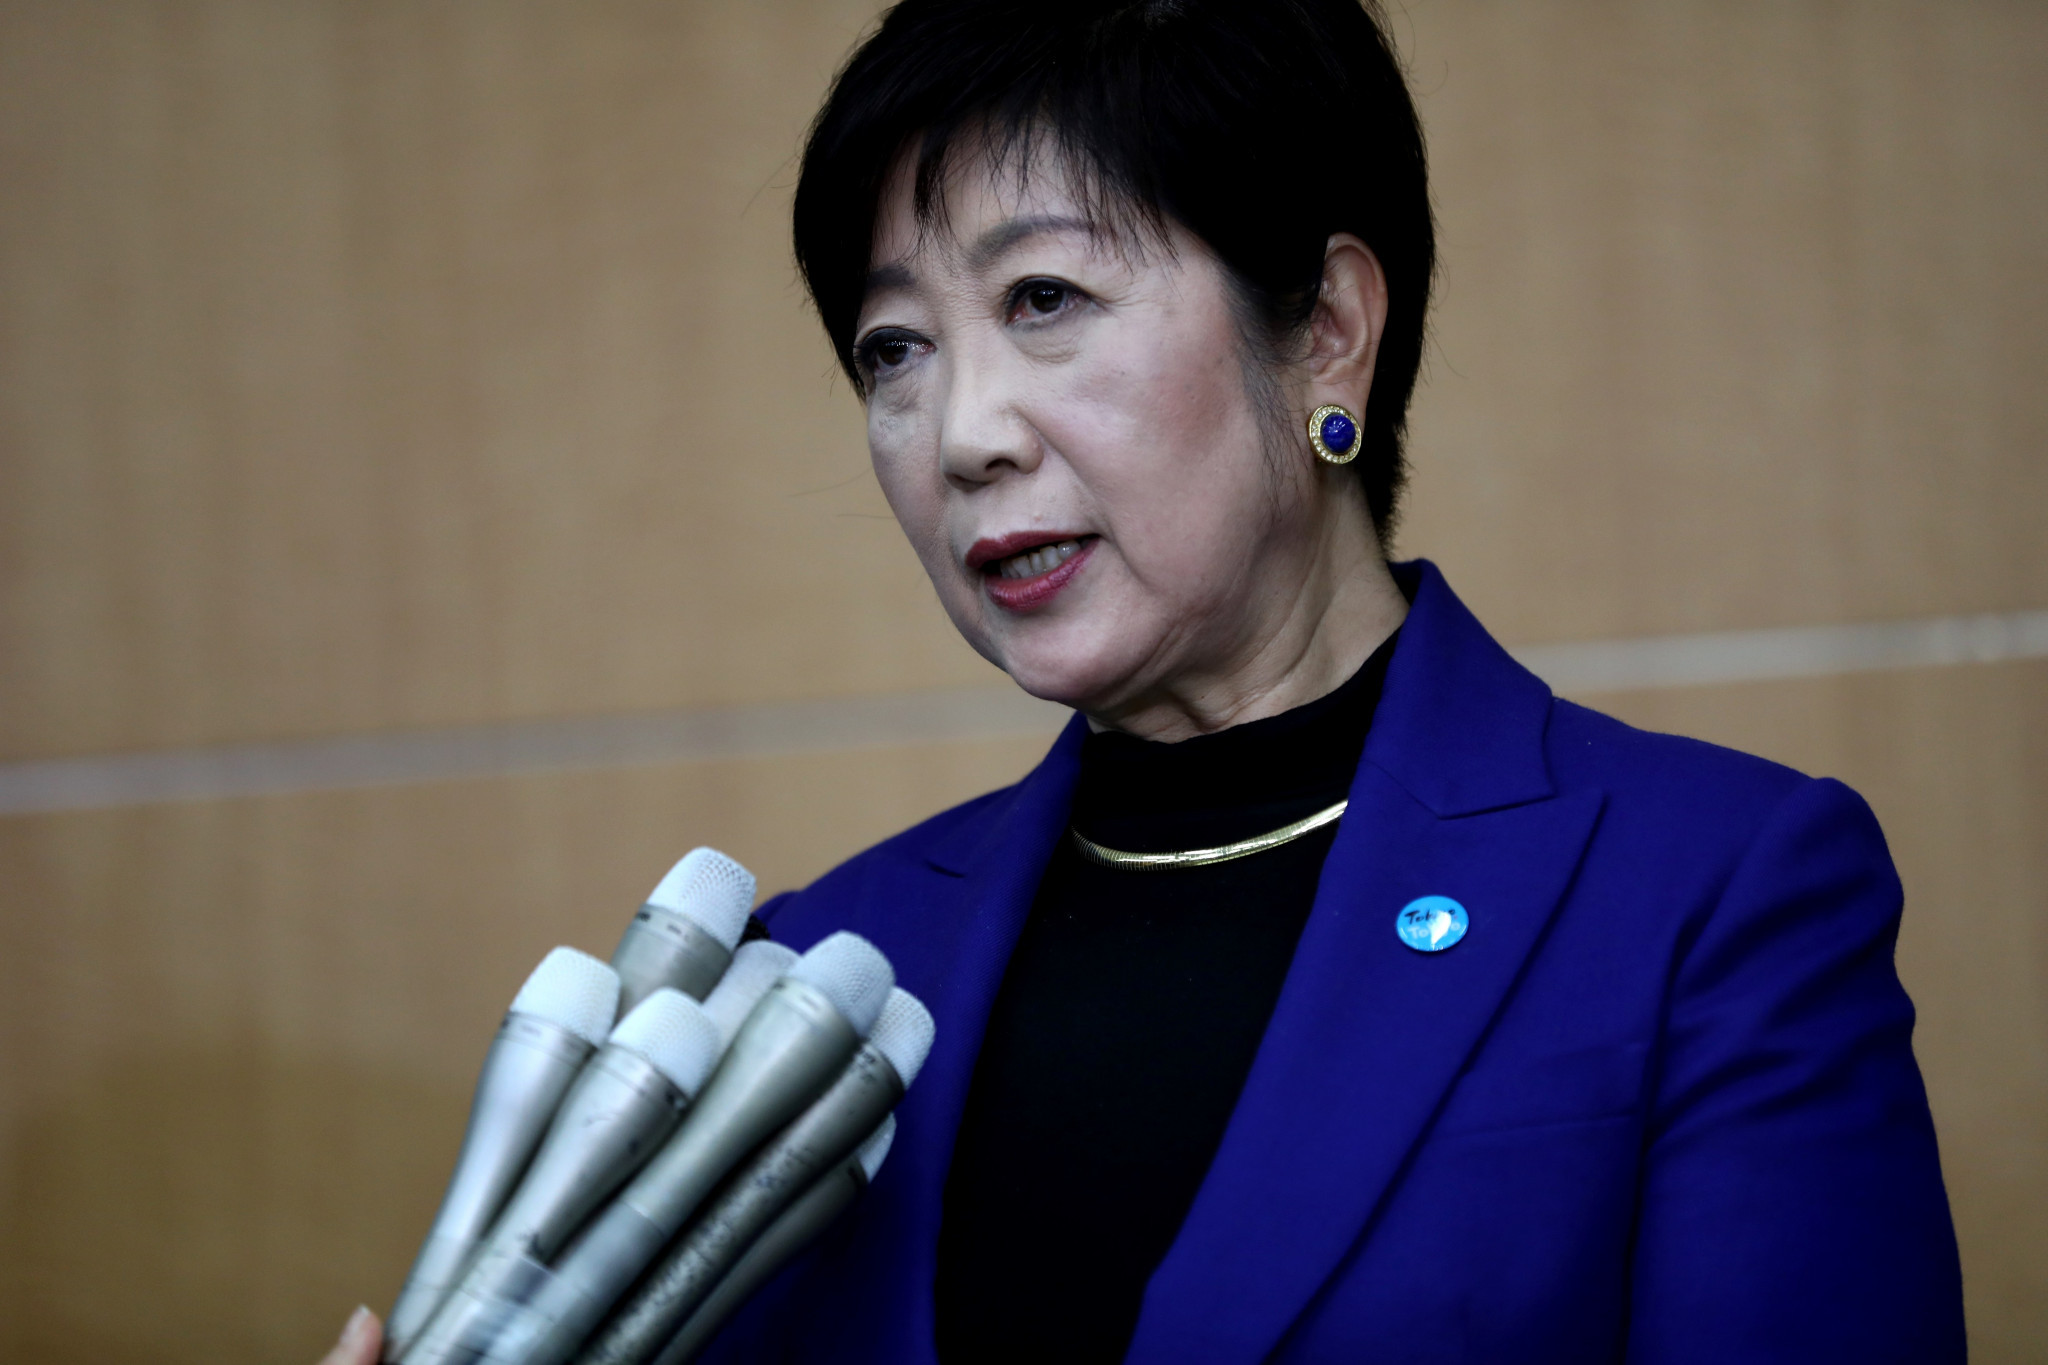 Tokyo's Governor Yuriko Koike says the Torch Relay will build momentum ahead of the Olympics and Paralympics ©Getty Images